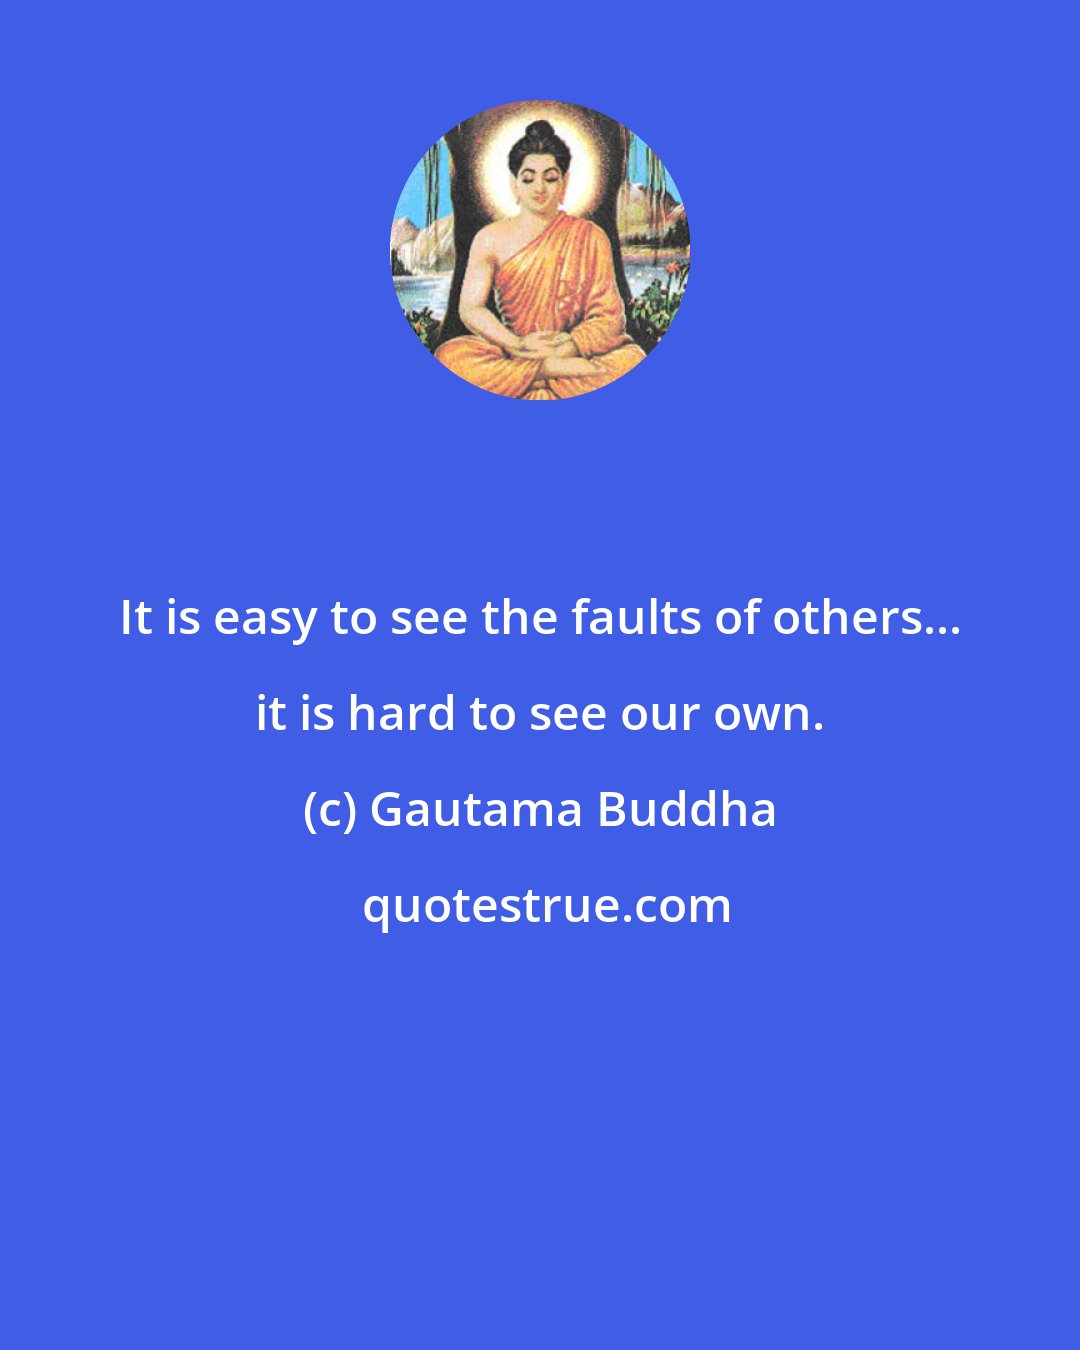 Gautama Buddha: It is easy to see the faults of others... it is hard to see our own.